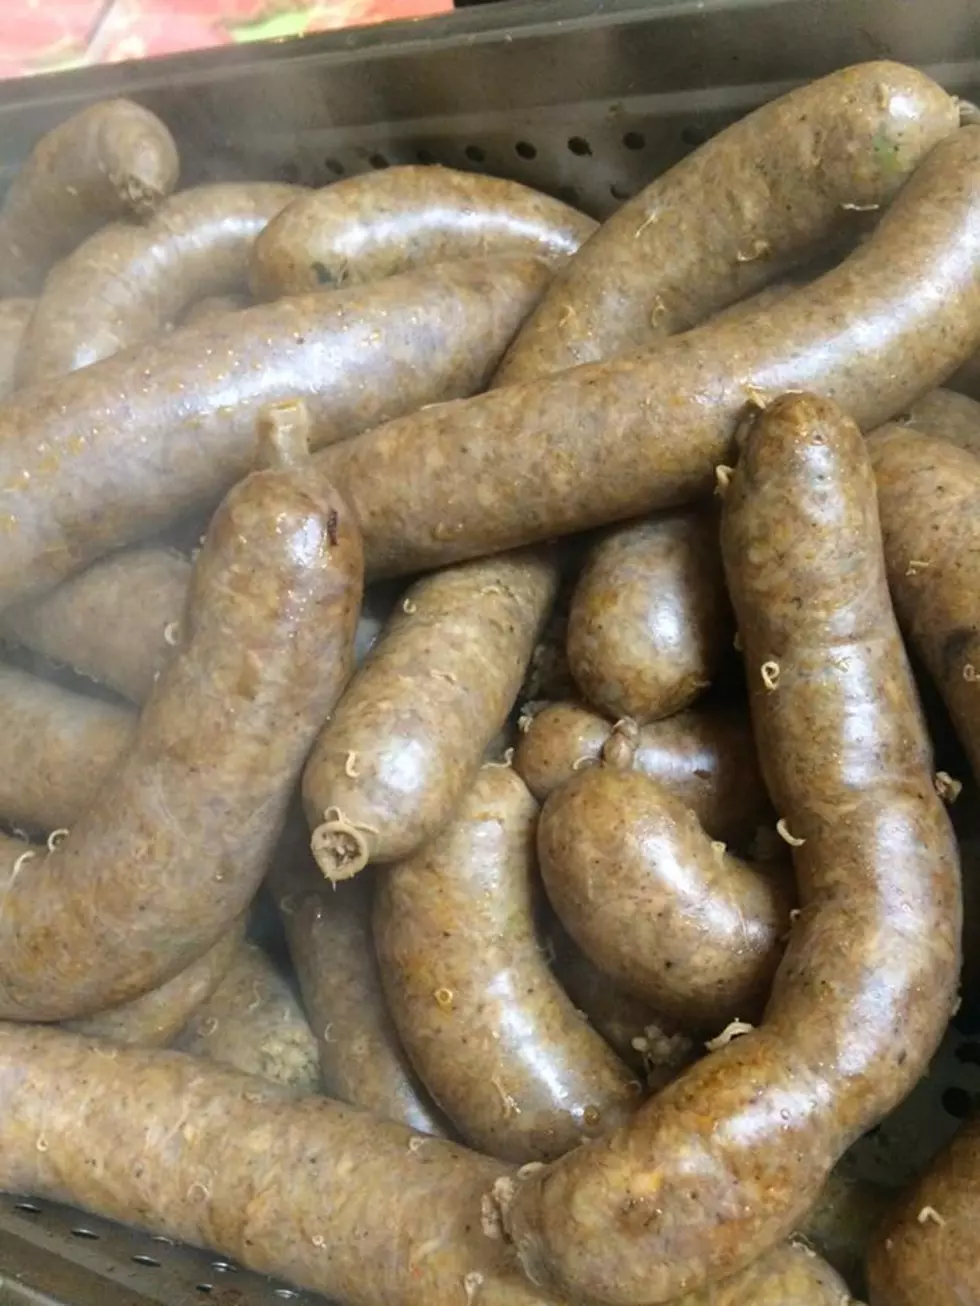 Seven Things to Do With Left Over Boudin